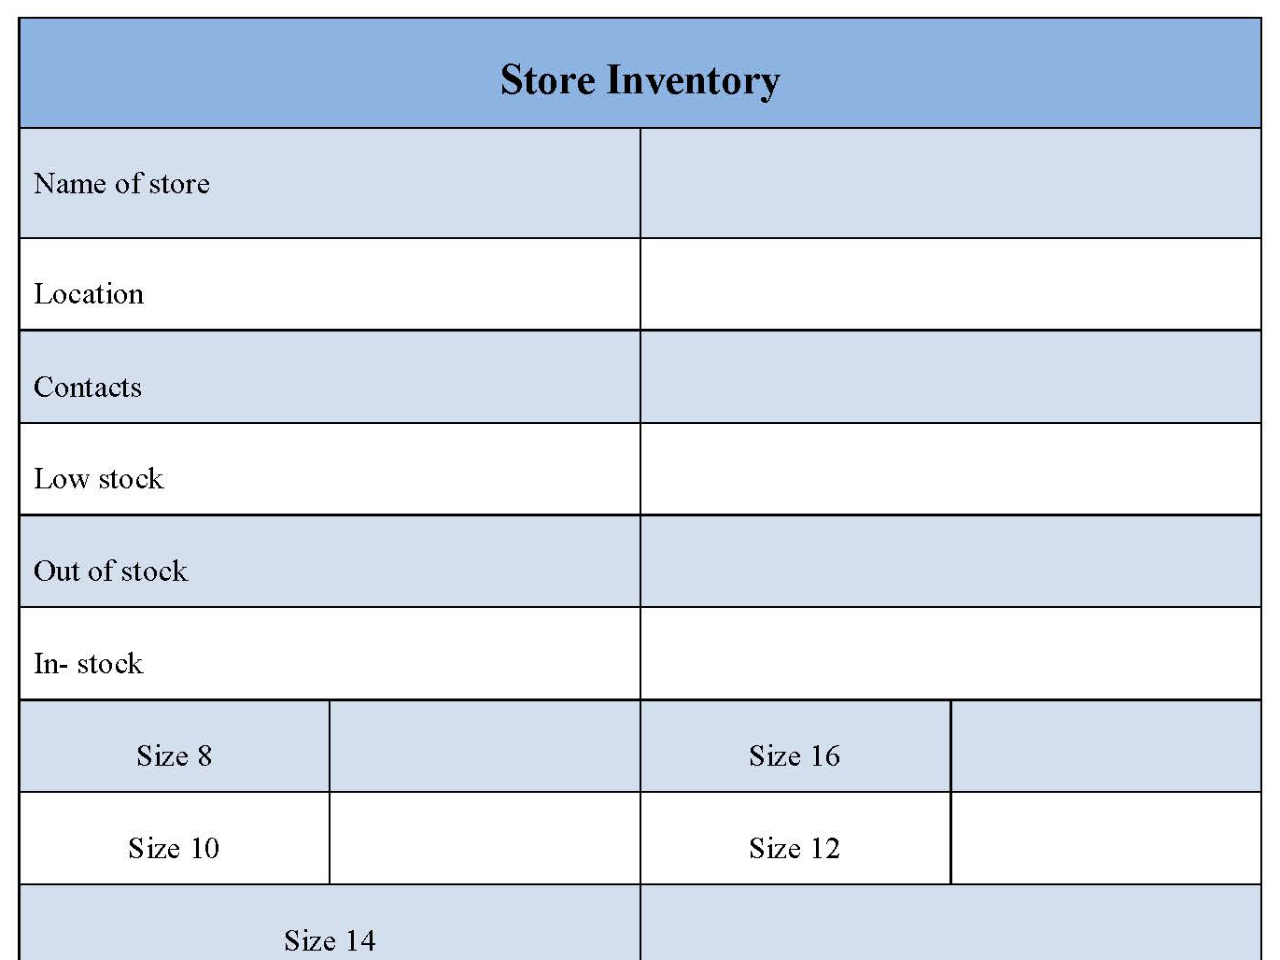 Store Inventory Form